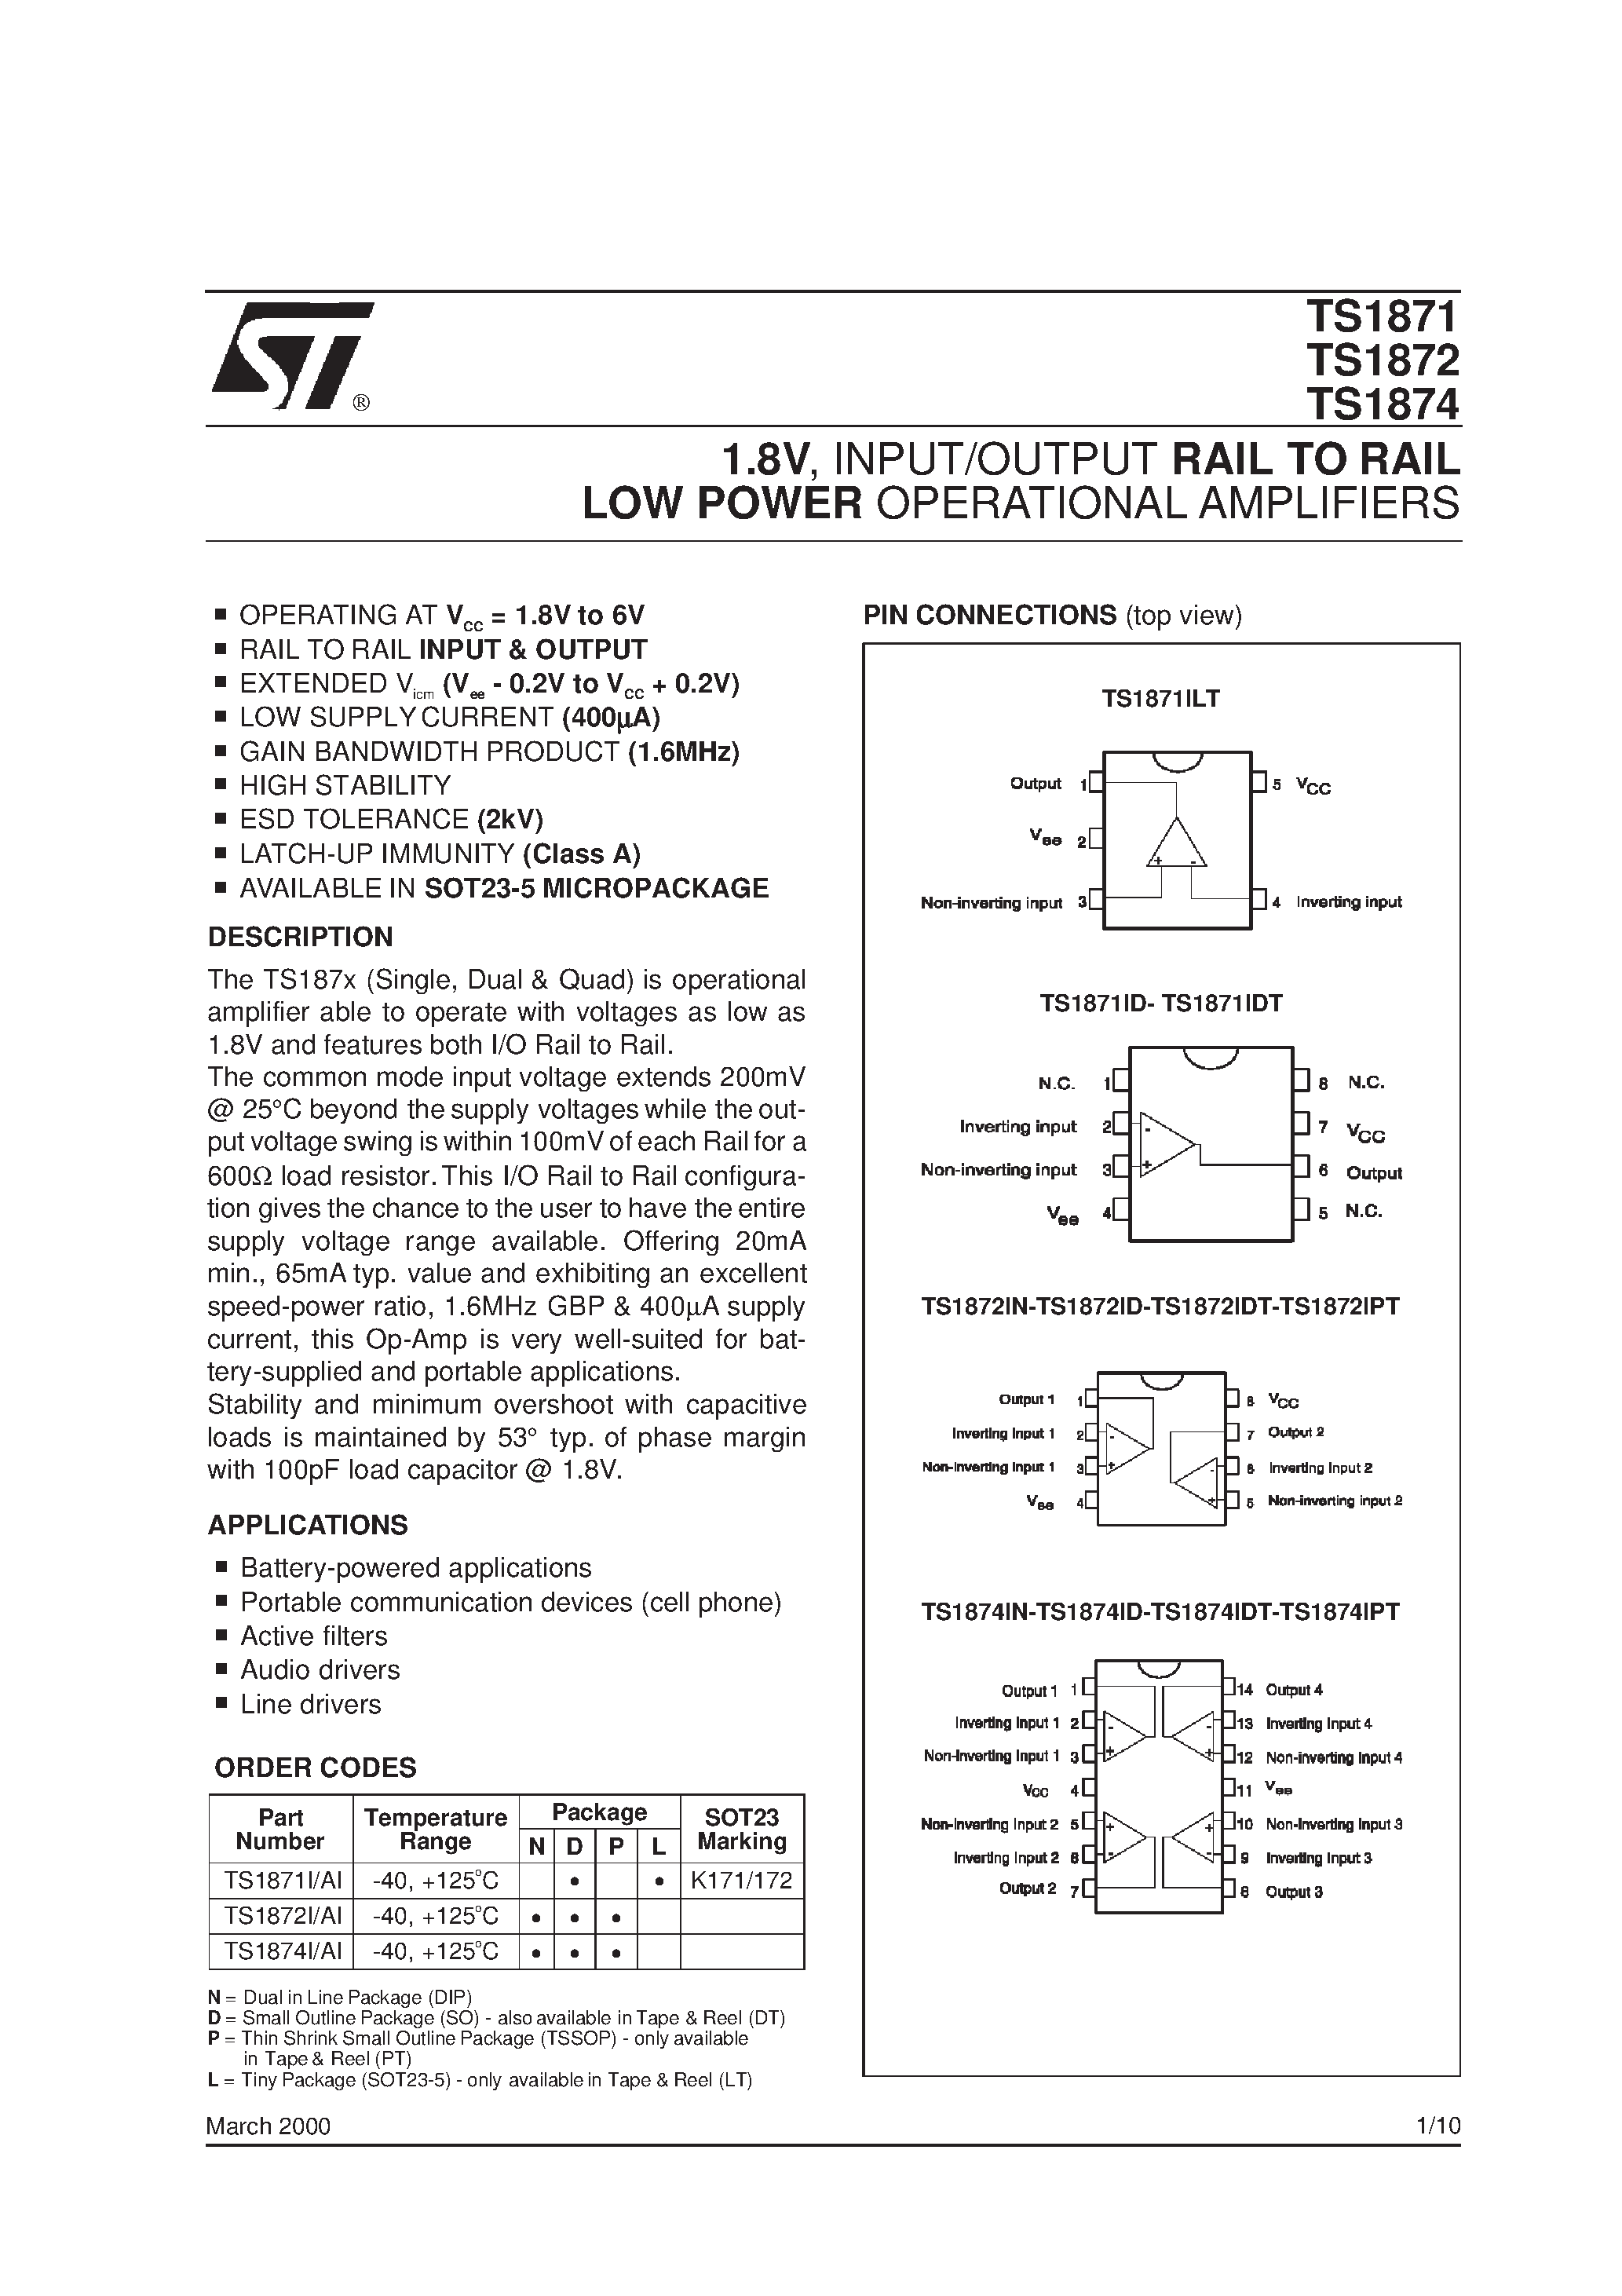 Datasheet TS1872 - 1.8V/ INPUT/OUTPUT RAIL TO RAIL LOW POWER OPERATIONAL AMPLIFIERS page 1